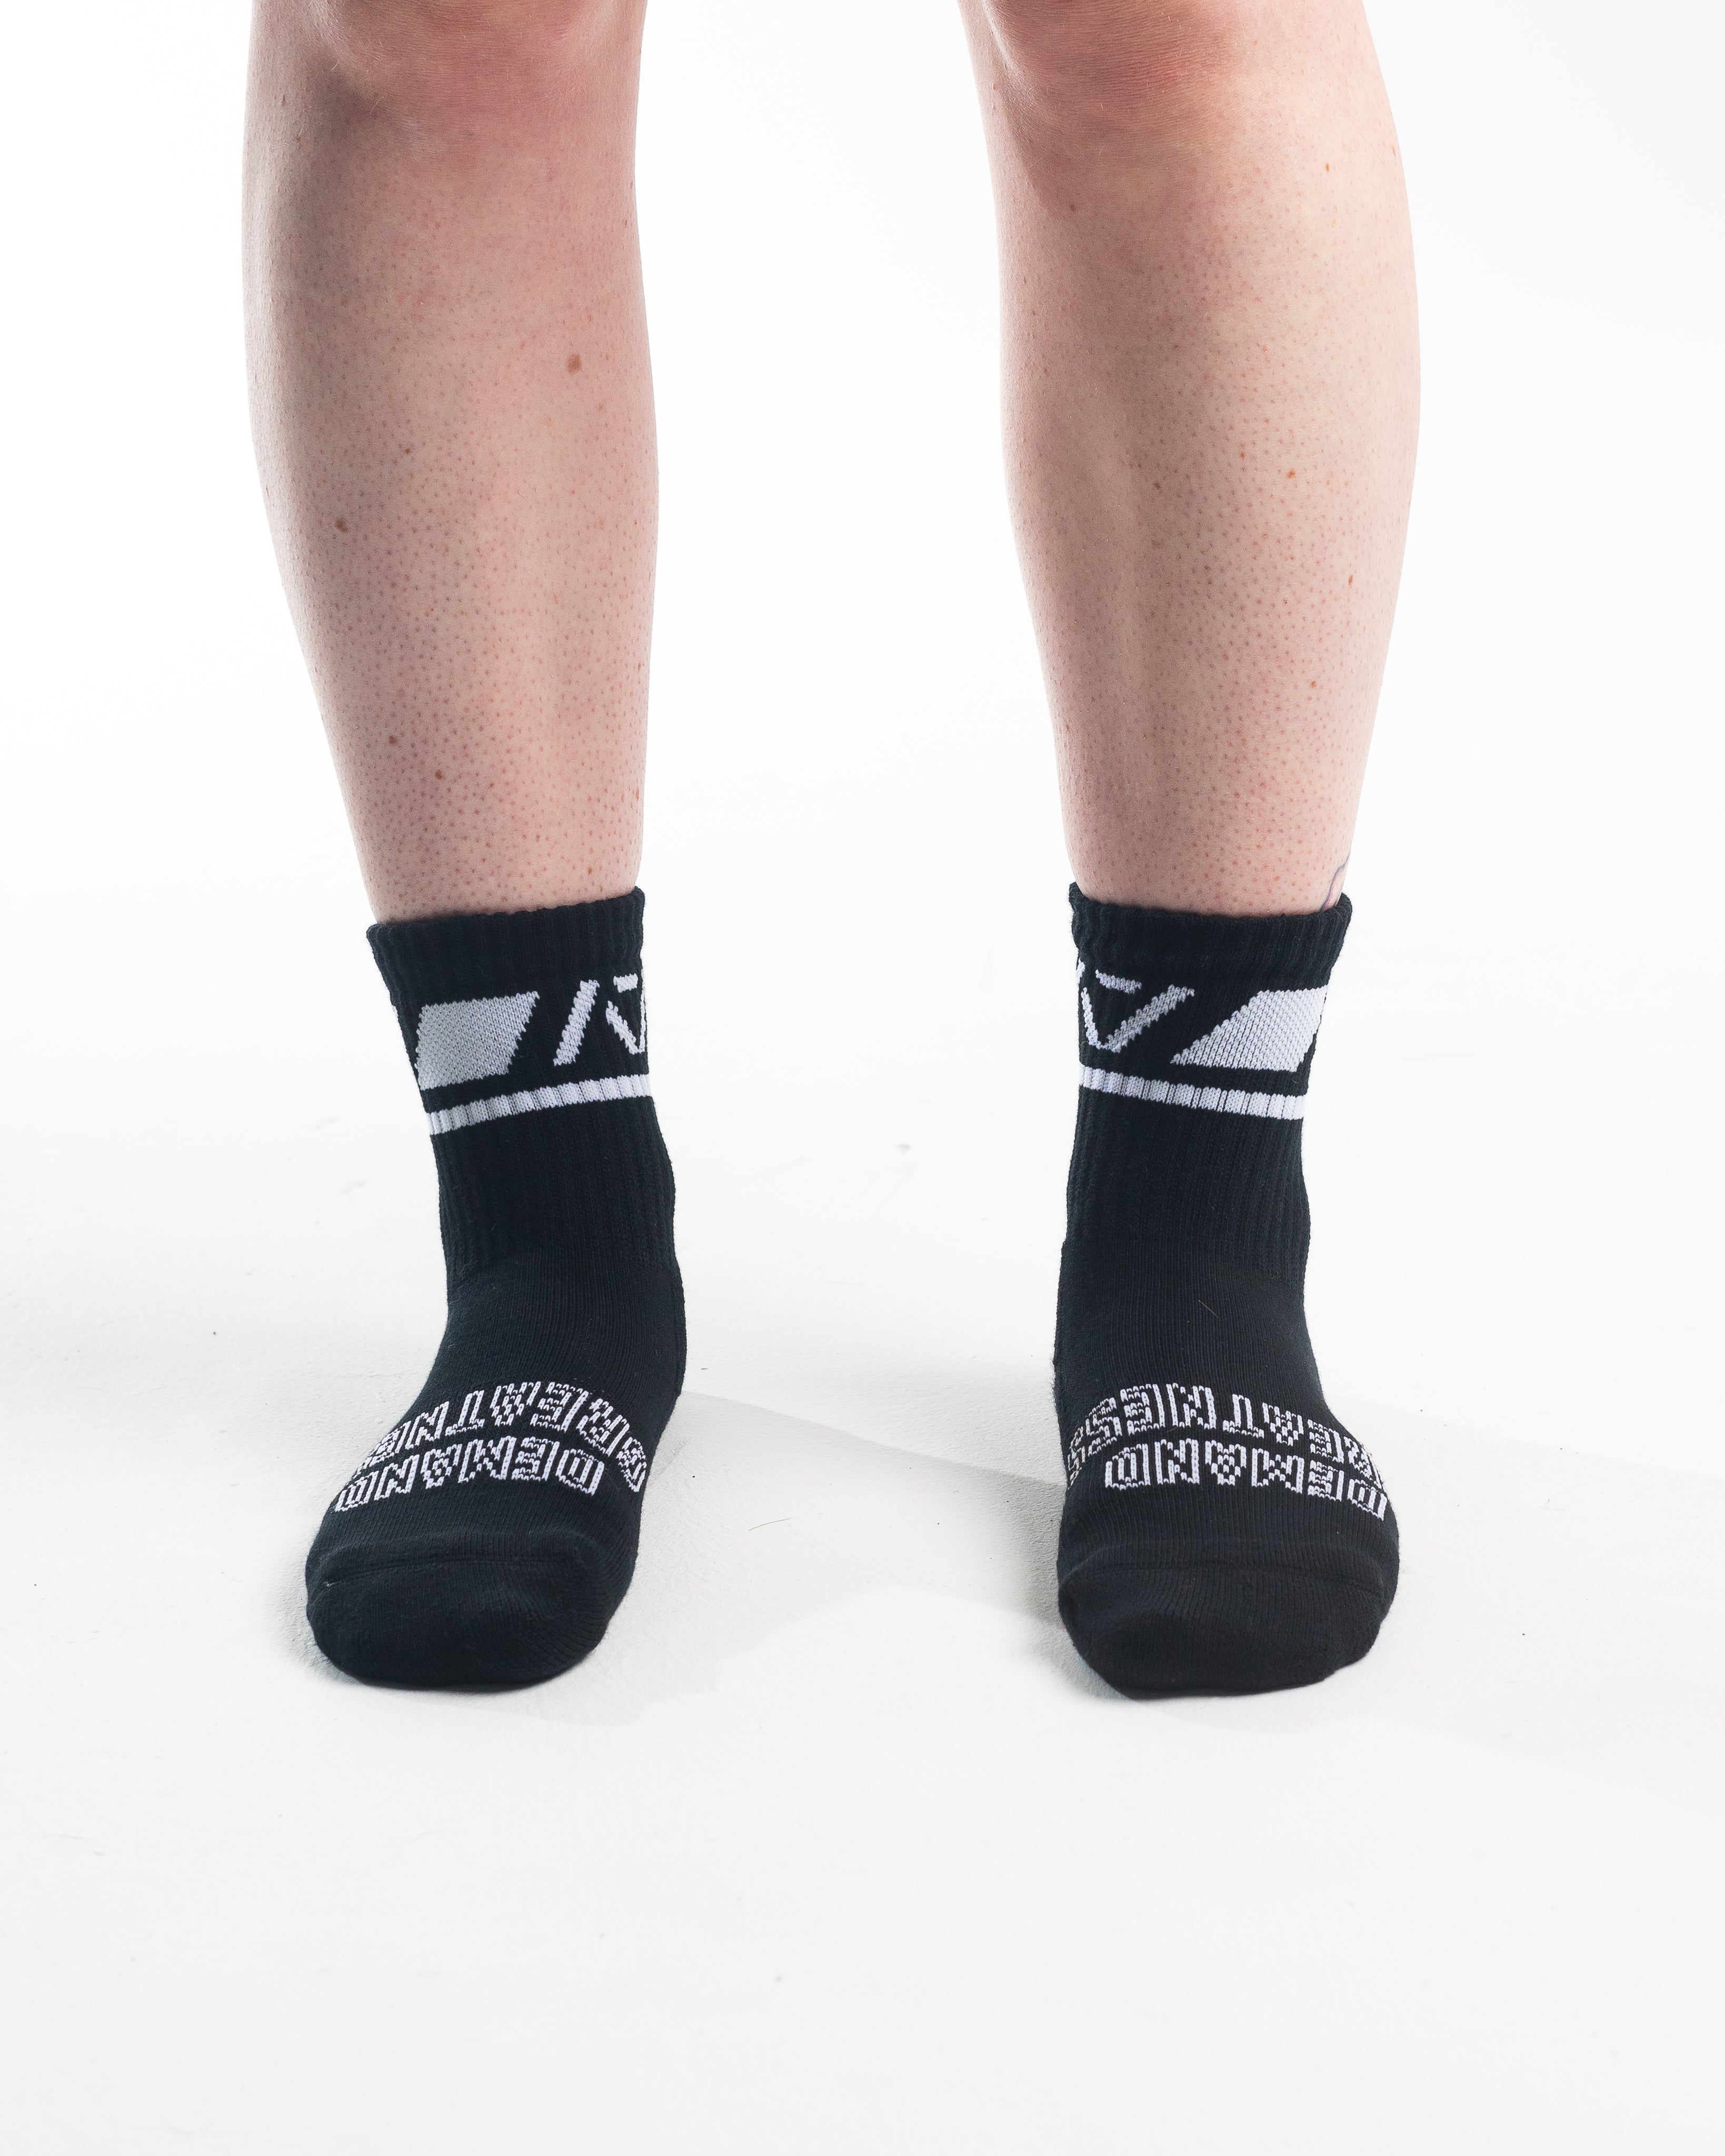 A7 Domino Crew socks showcase gold logos and let your energy show on the platform, in your training or while out and about. The IPF Approved Stealth Meet Kit includes Powerlifting Singlet, A7 Meet Shirt, A7 Zebra Wrist Wraps, A7 Deadlift Socks, Hourglass Knee Sleeves (Stiff Knee Sleeves and Rigor Mortis Knee Sleeves). All A7 Powerlifting Equipment shipping to UK, Norway, Switzerland and Iceland.